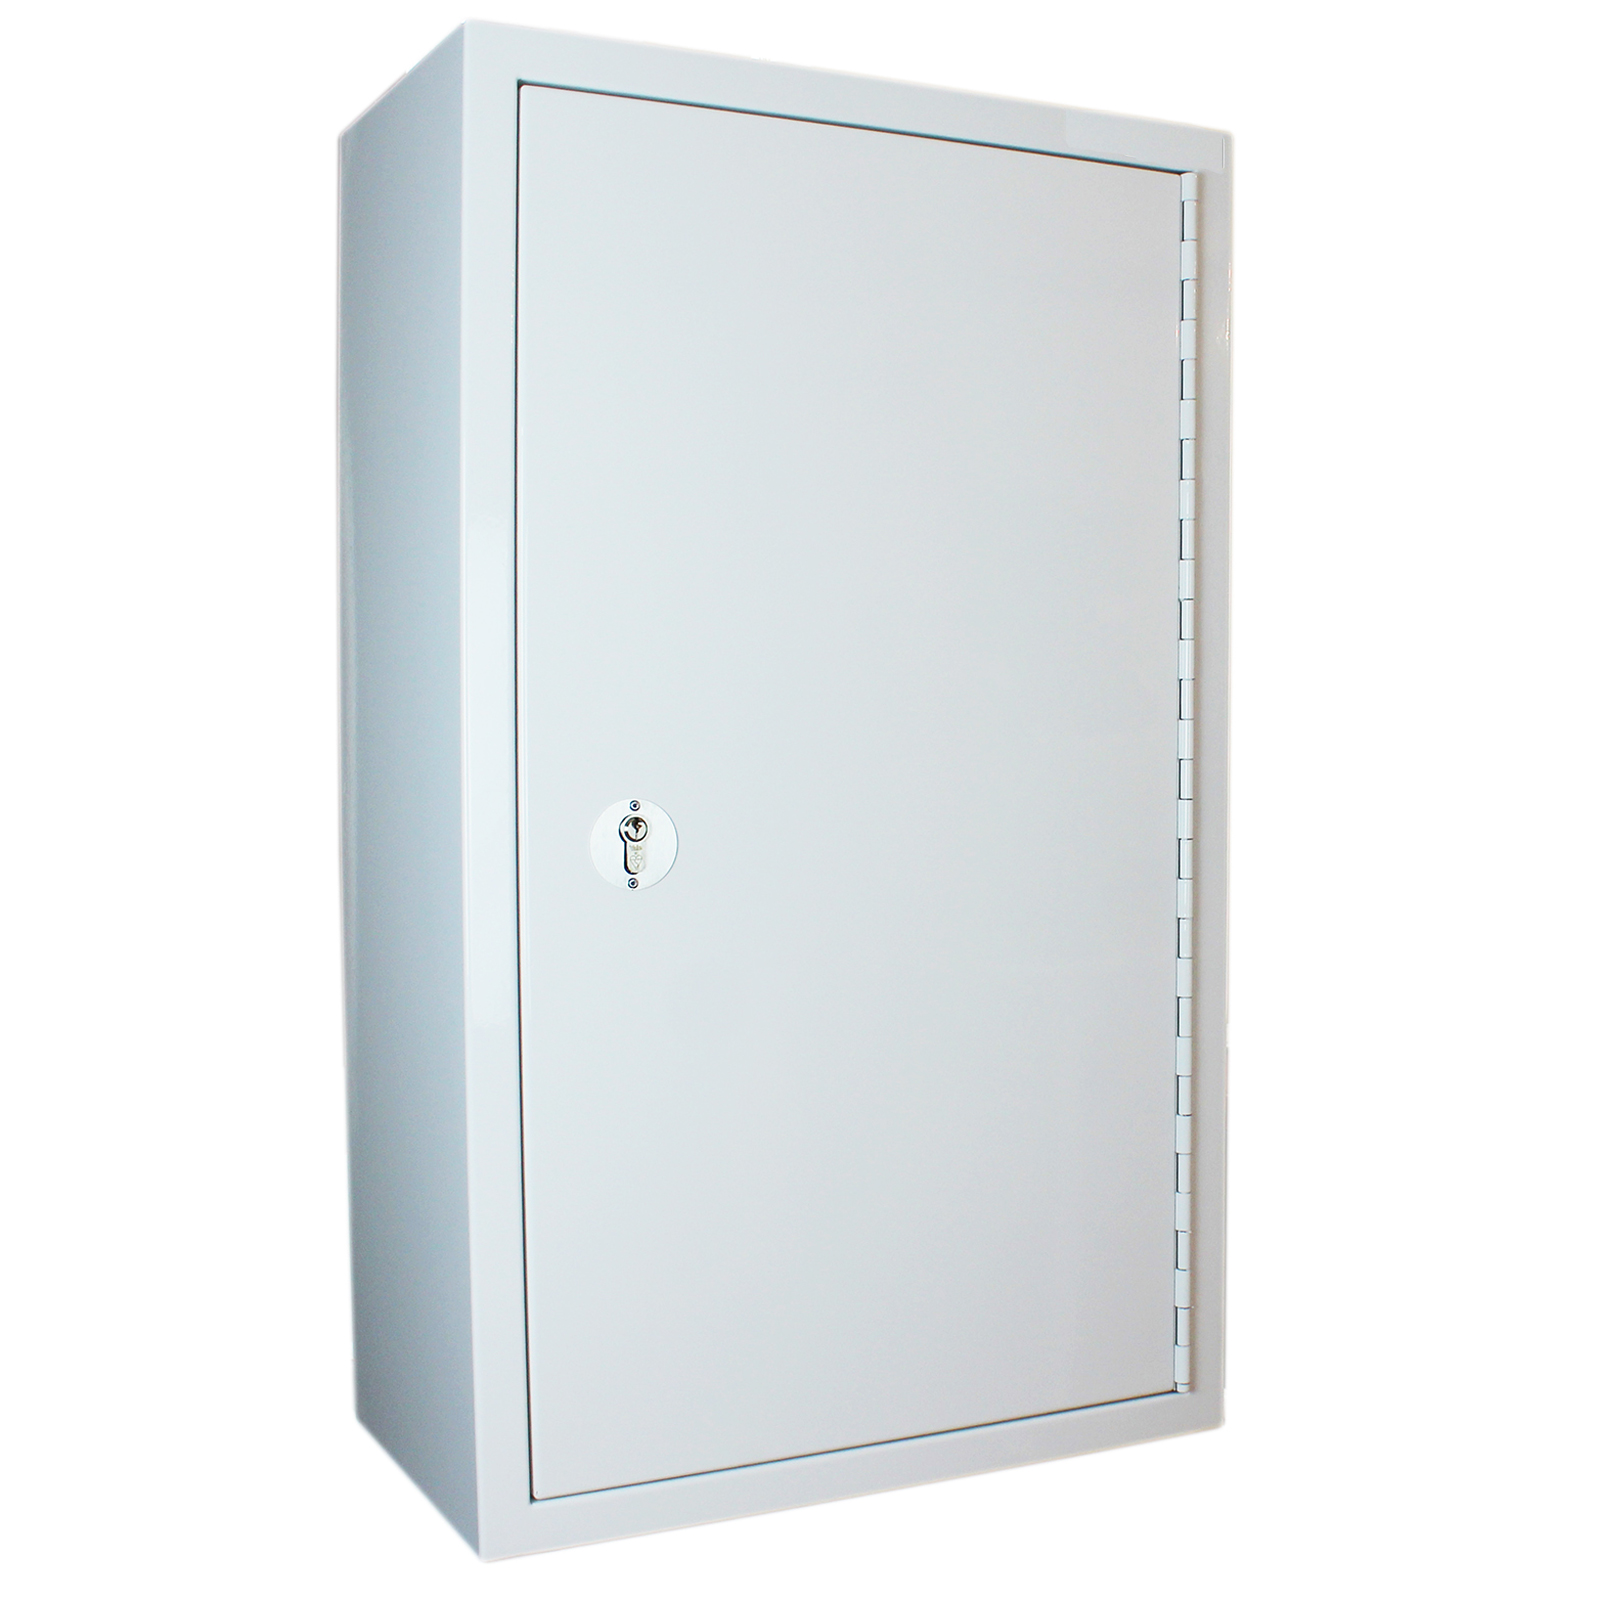 FPD 12148 controlled drug cupboard closed door 127.5 litre